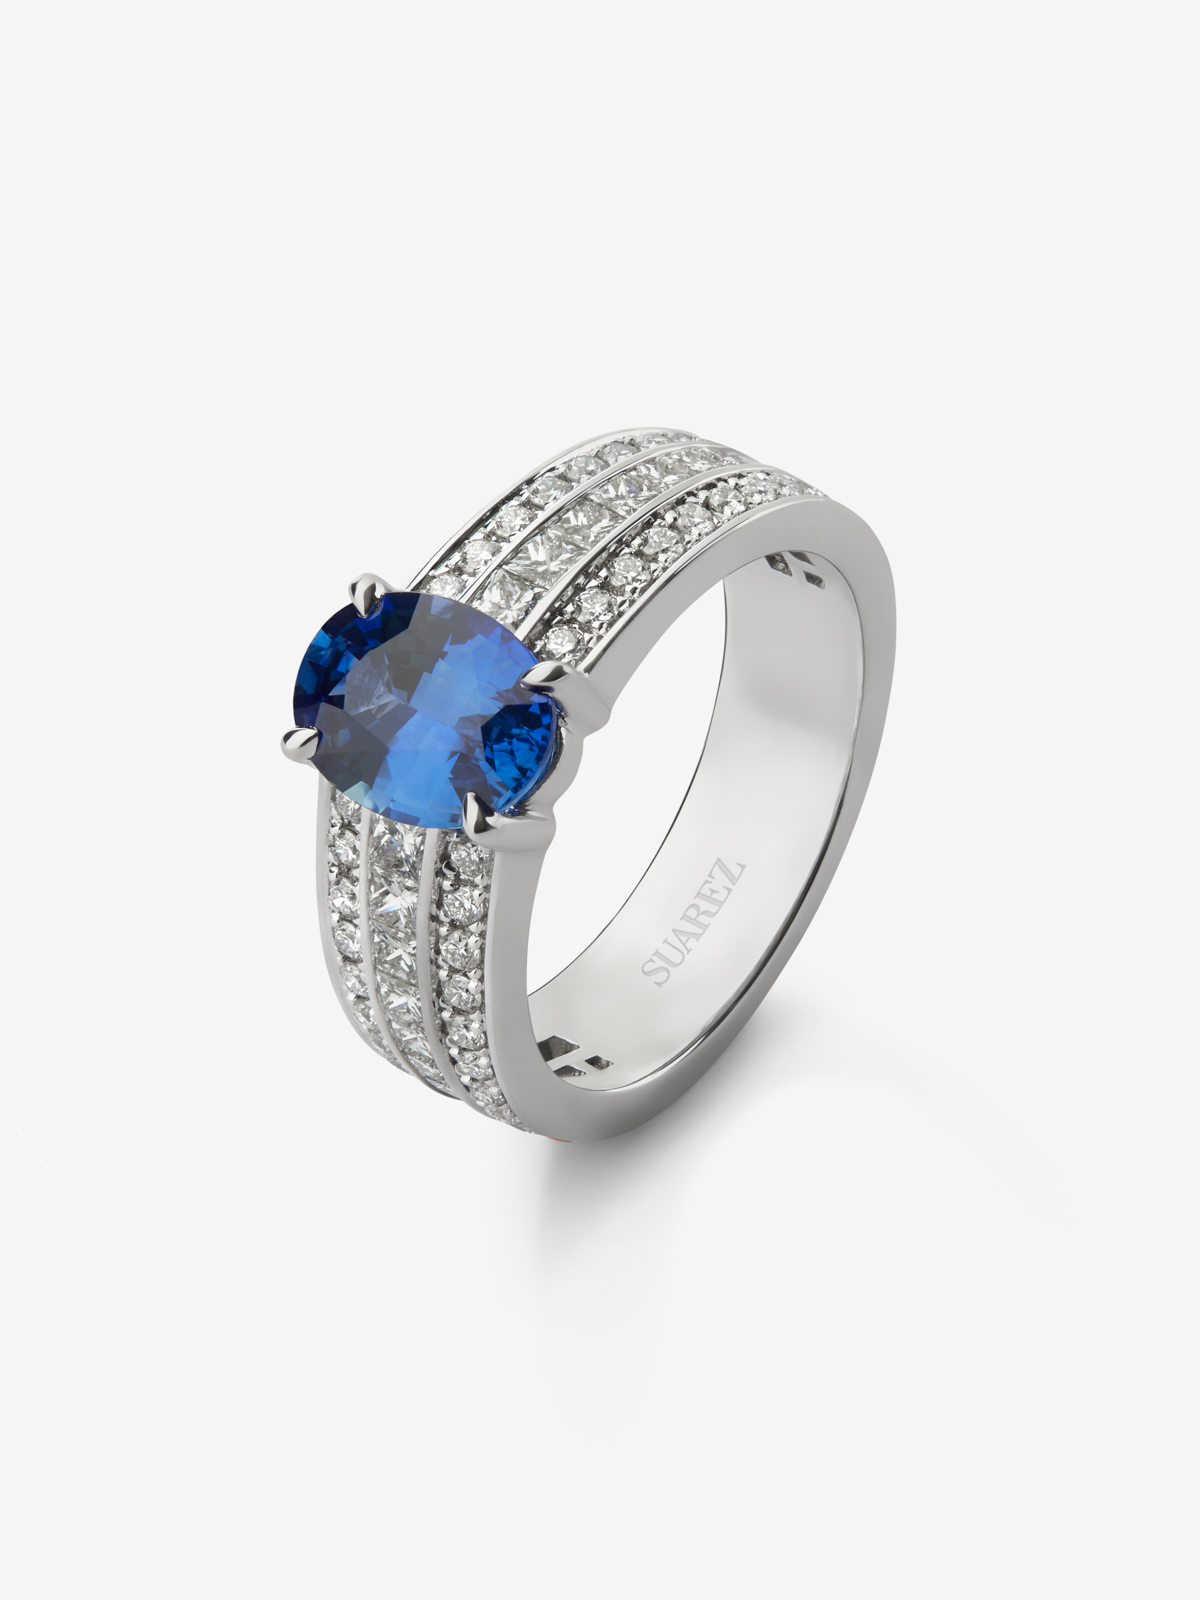 18K white gold ring with oval-cut royal blue sapphire of 2.53 cts, 44 brilliant-cut diamonds with a total of 0.37 cts and 22 princess-cut diamonds with a total of 0.58 cts